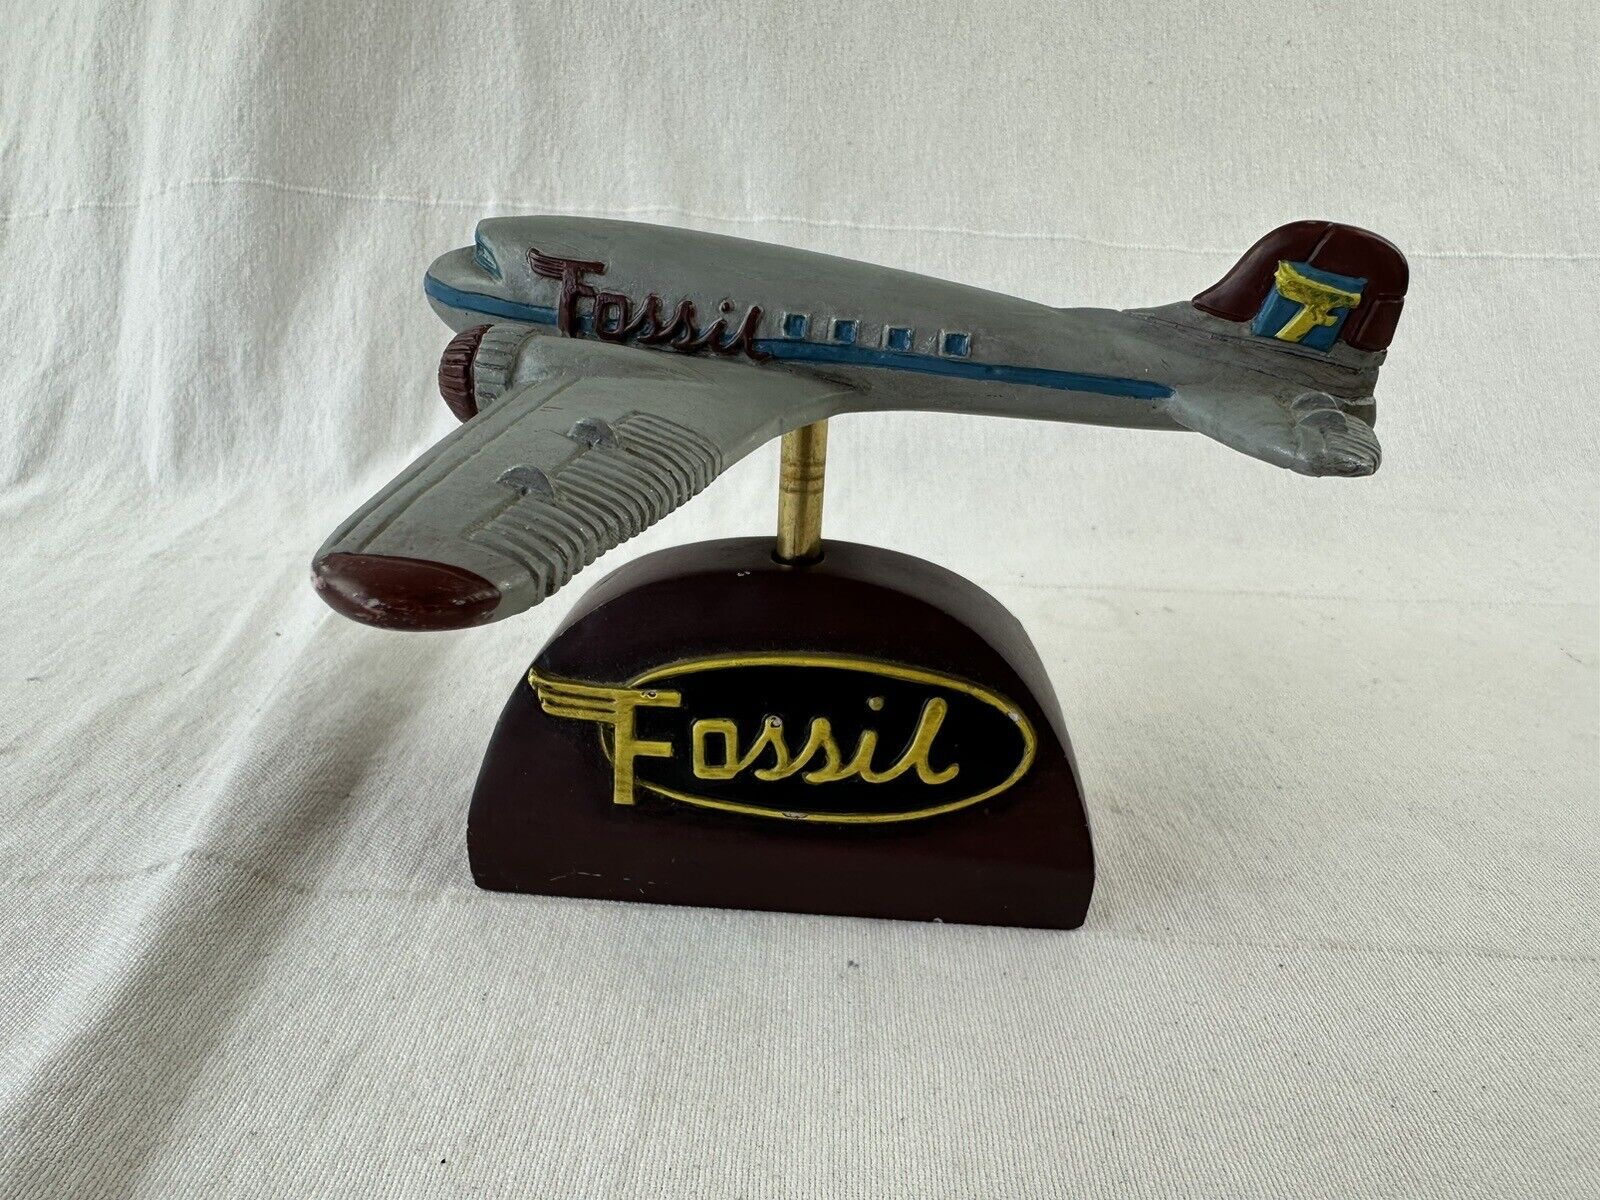 FOSSIL Dealer Collector Store Display Advertising Airplane Plane Aviation Figure